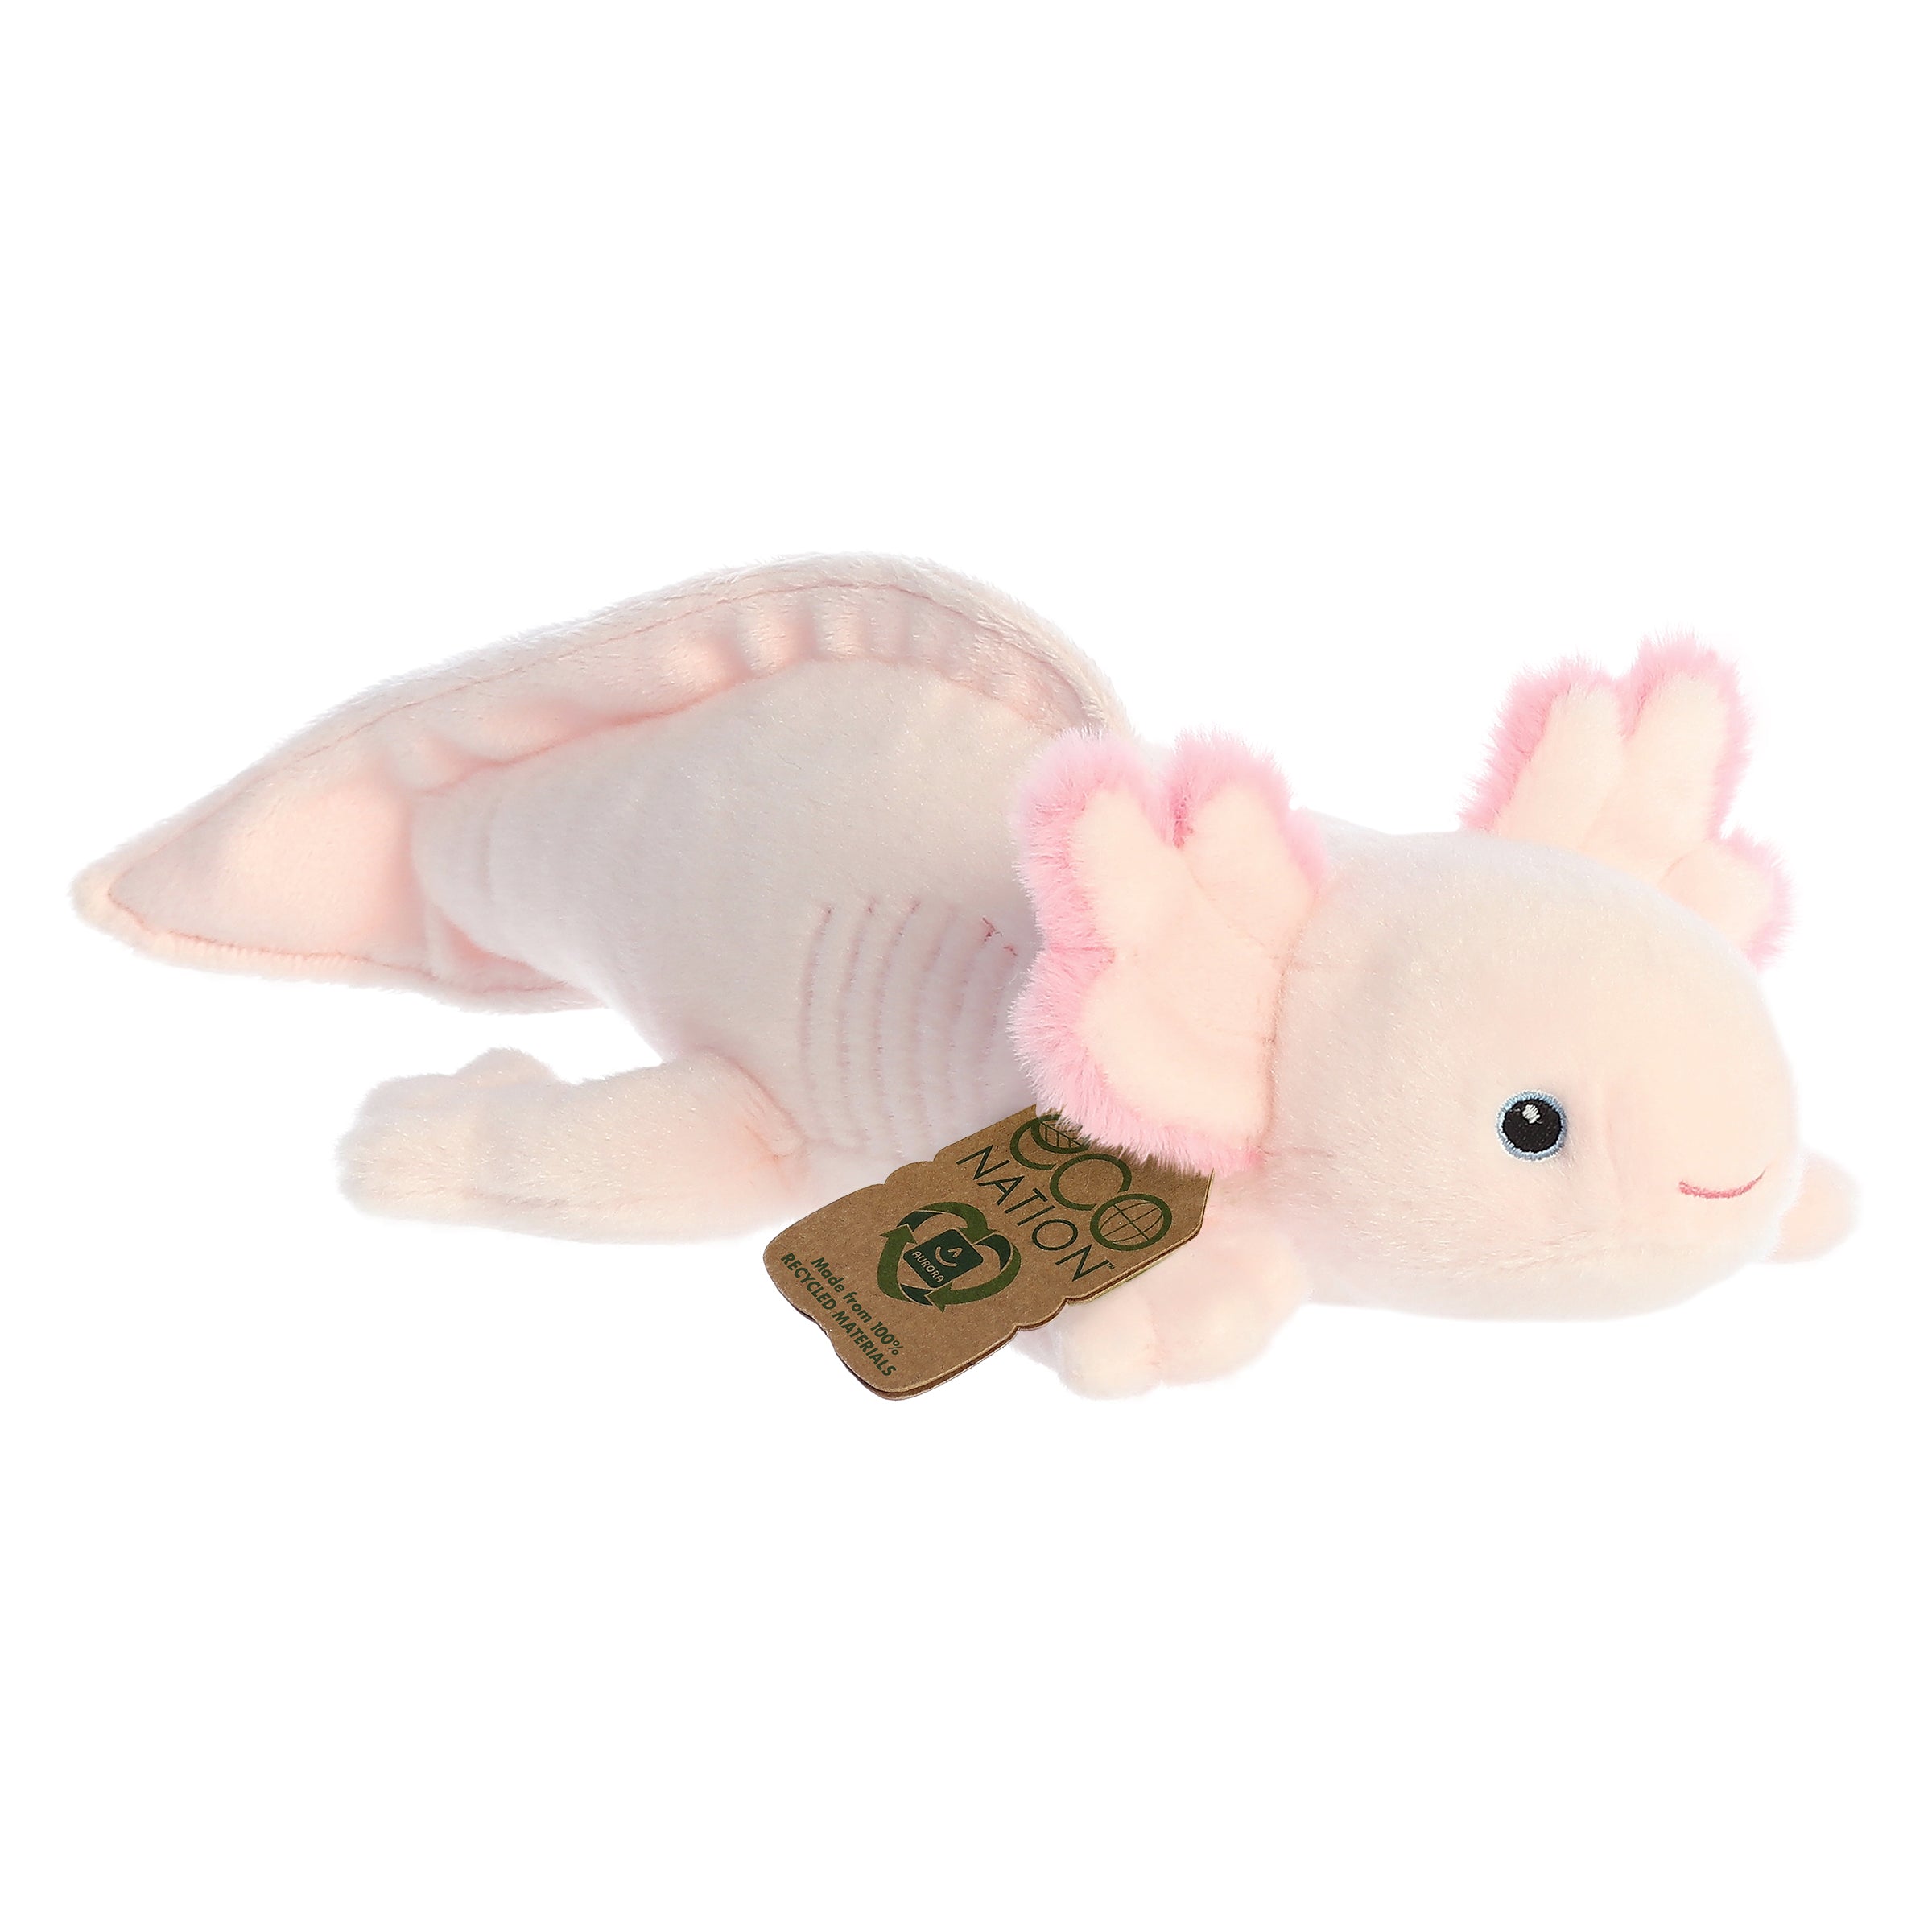 A precious axolotl plush with a vibrant pink coat, fluffy ears, embroidered eyes, and an eco-nation tag around its neck